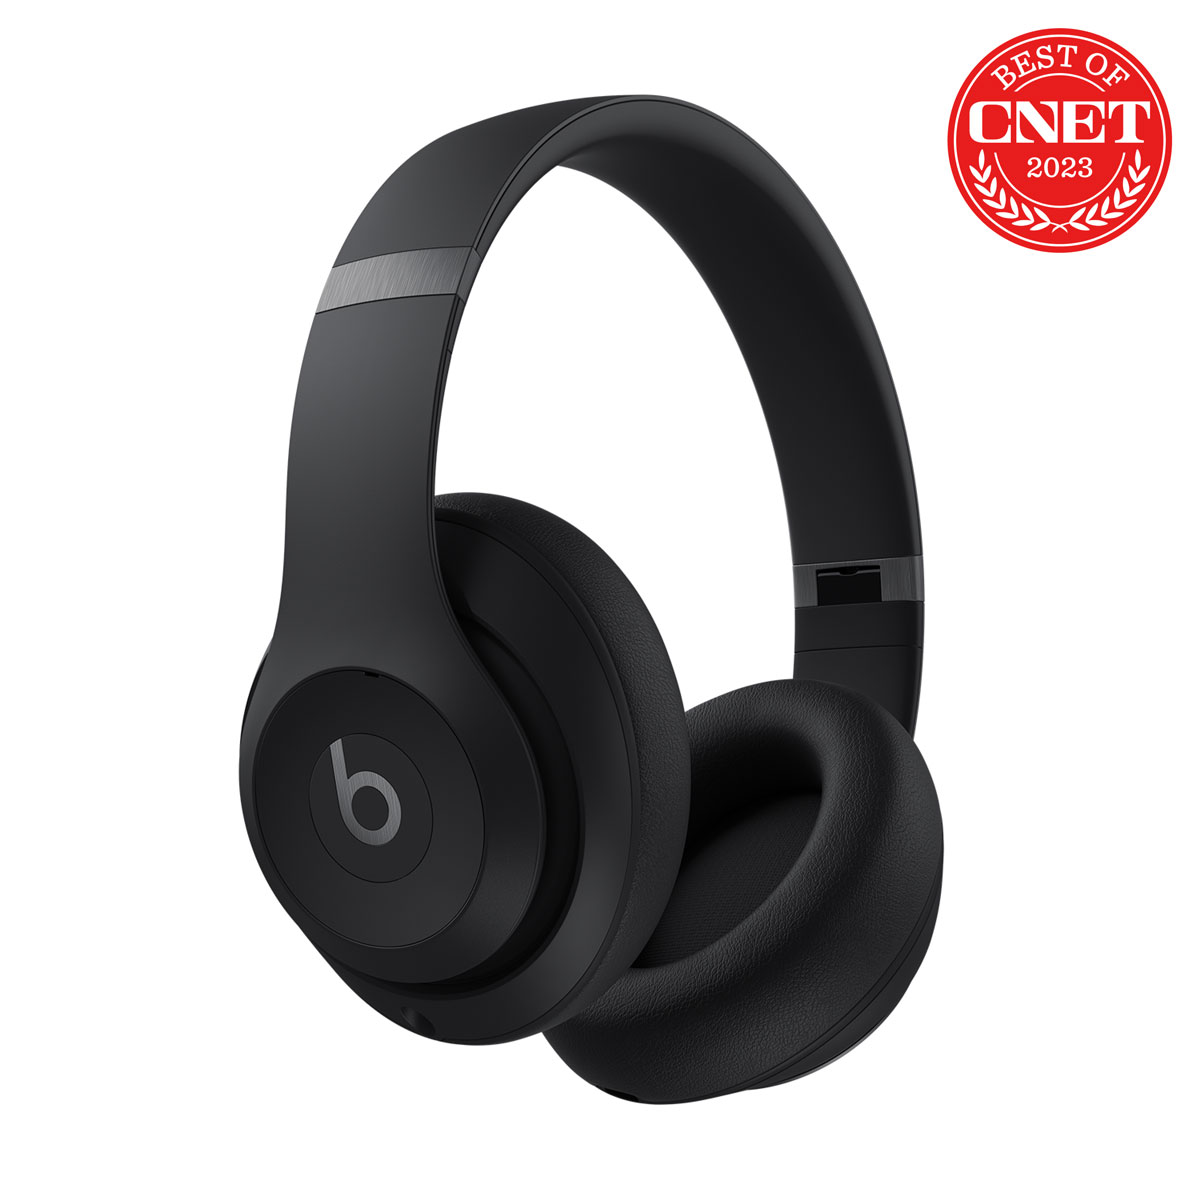 Beats Studio3 Wireless Noise Cancelling Over-Ear Headphones - Apple W1  Headphone Chip, Class 1 Bluetooth, 22 Hours of Listening Time, Built-in